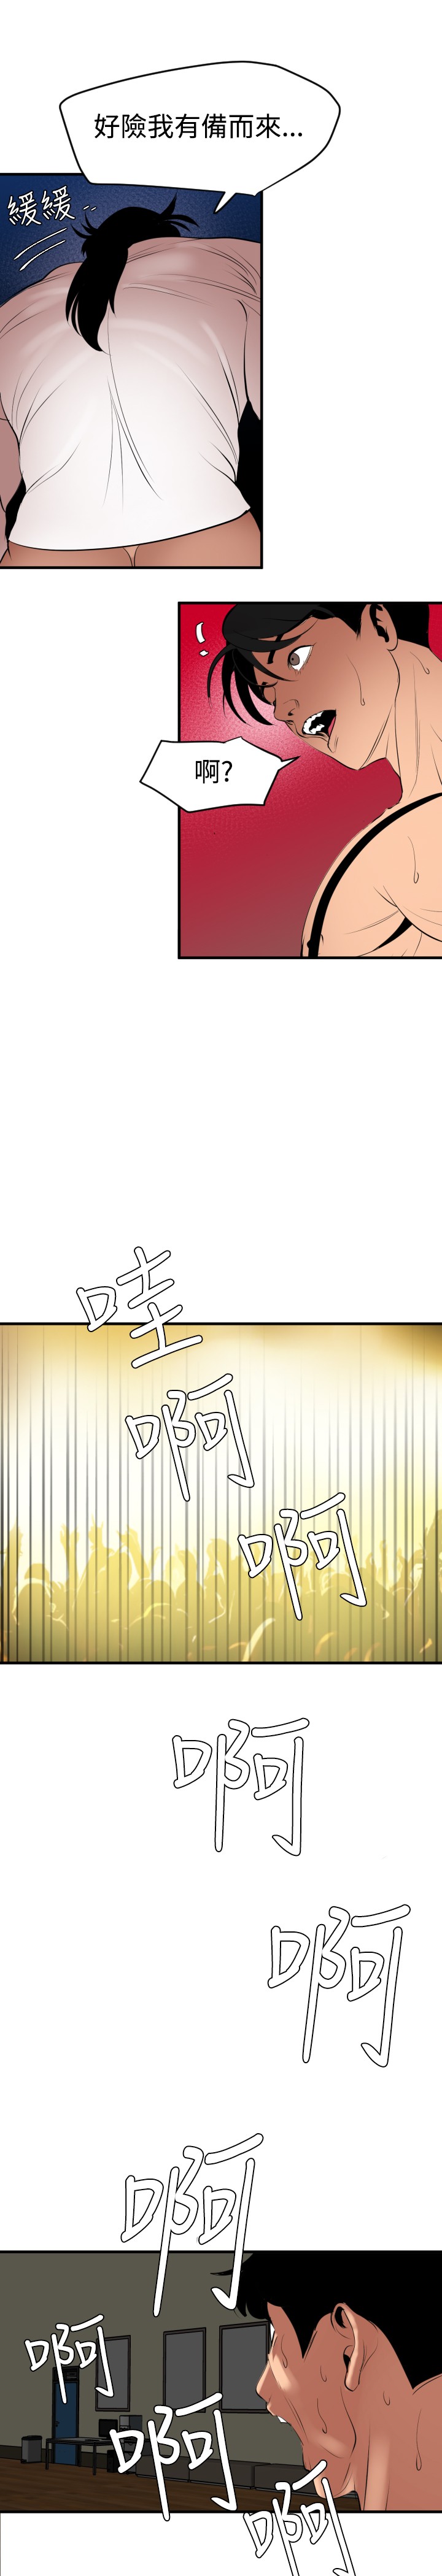 Desire King 欲求王 Ch.41~53 [Chinese] [黑嘿嘿] 慾求王